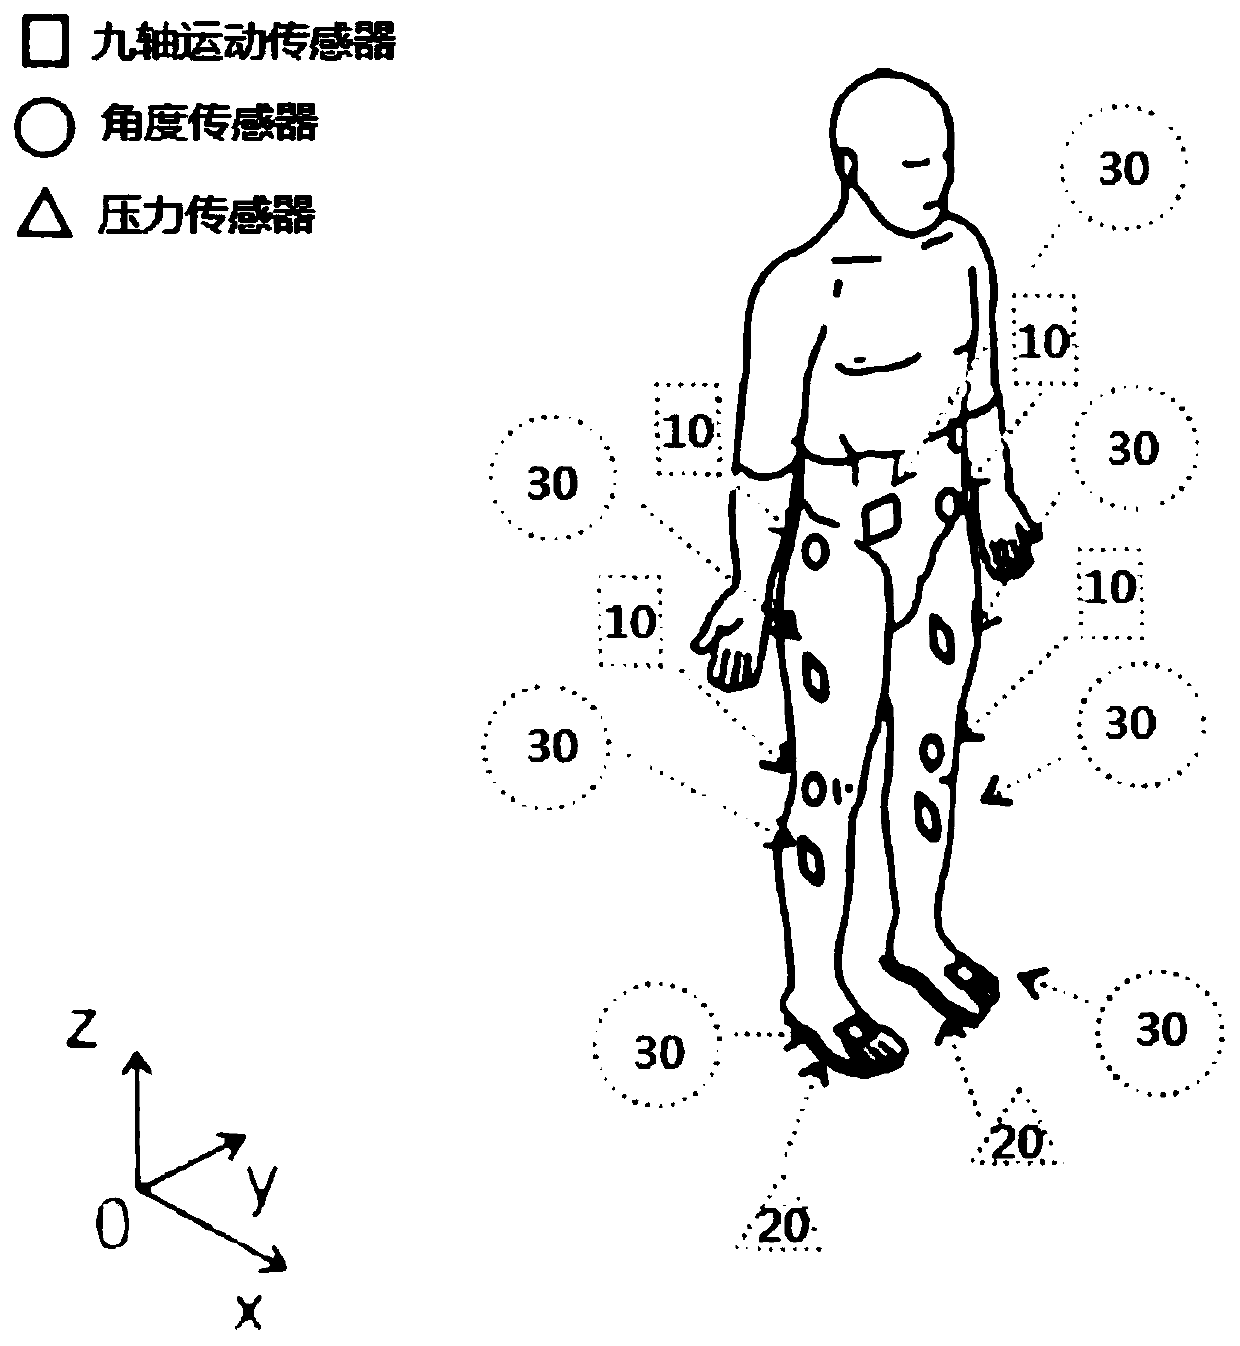 Human body lower limb pose and gait detection device and method